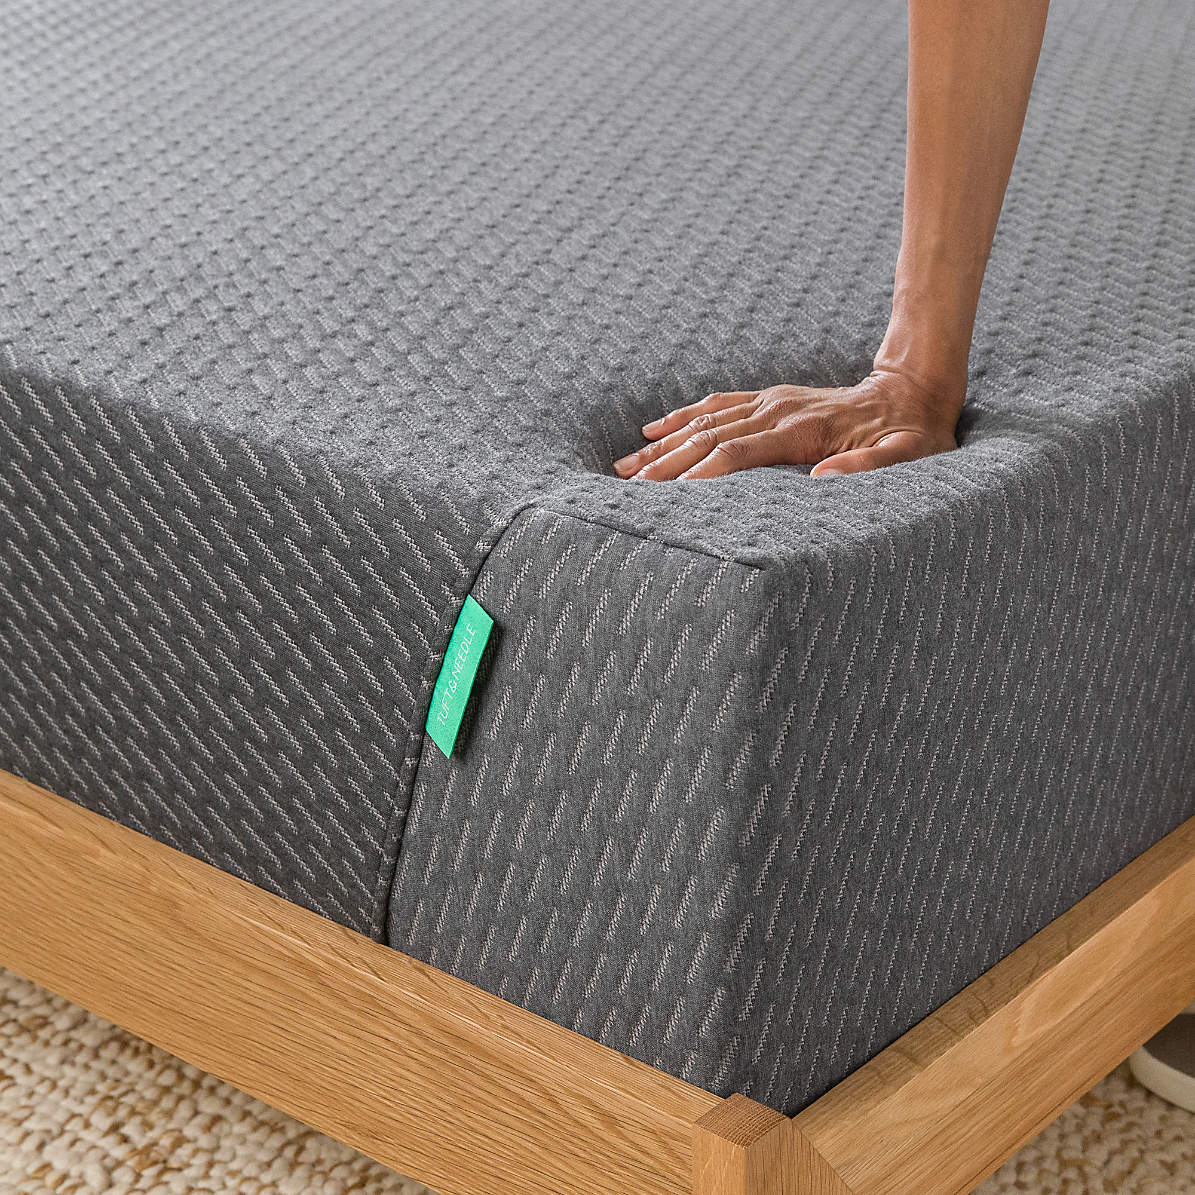 Tuft And Needle Mint King Mattress In A, Tuft And Needle King Size Bed Dimensions